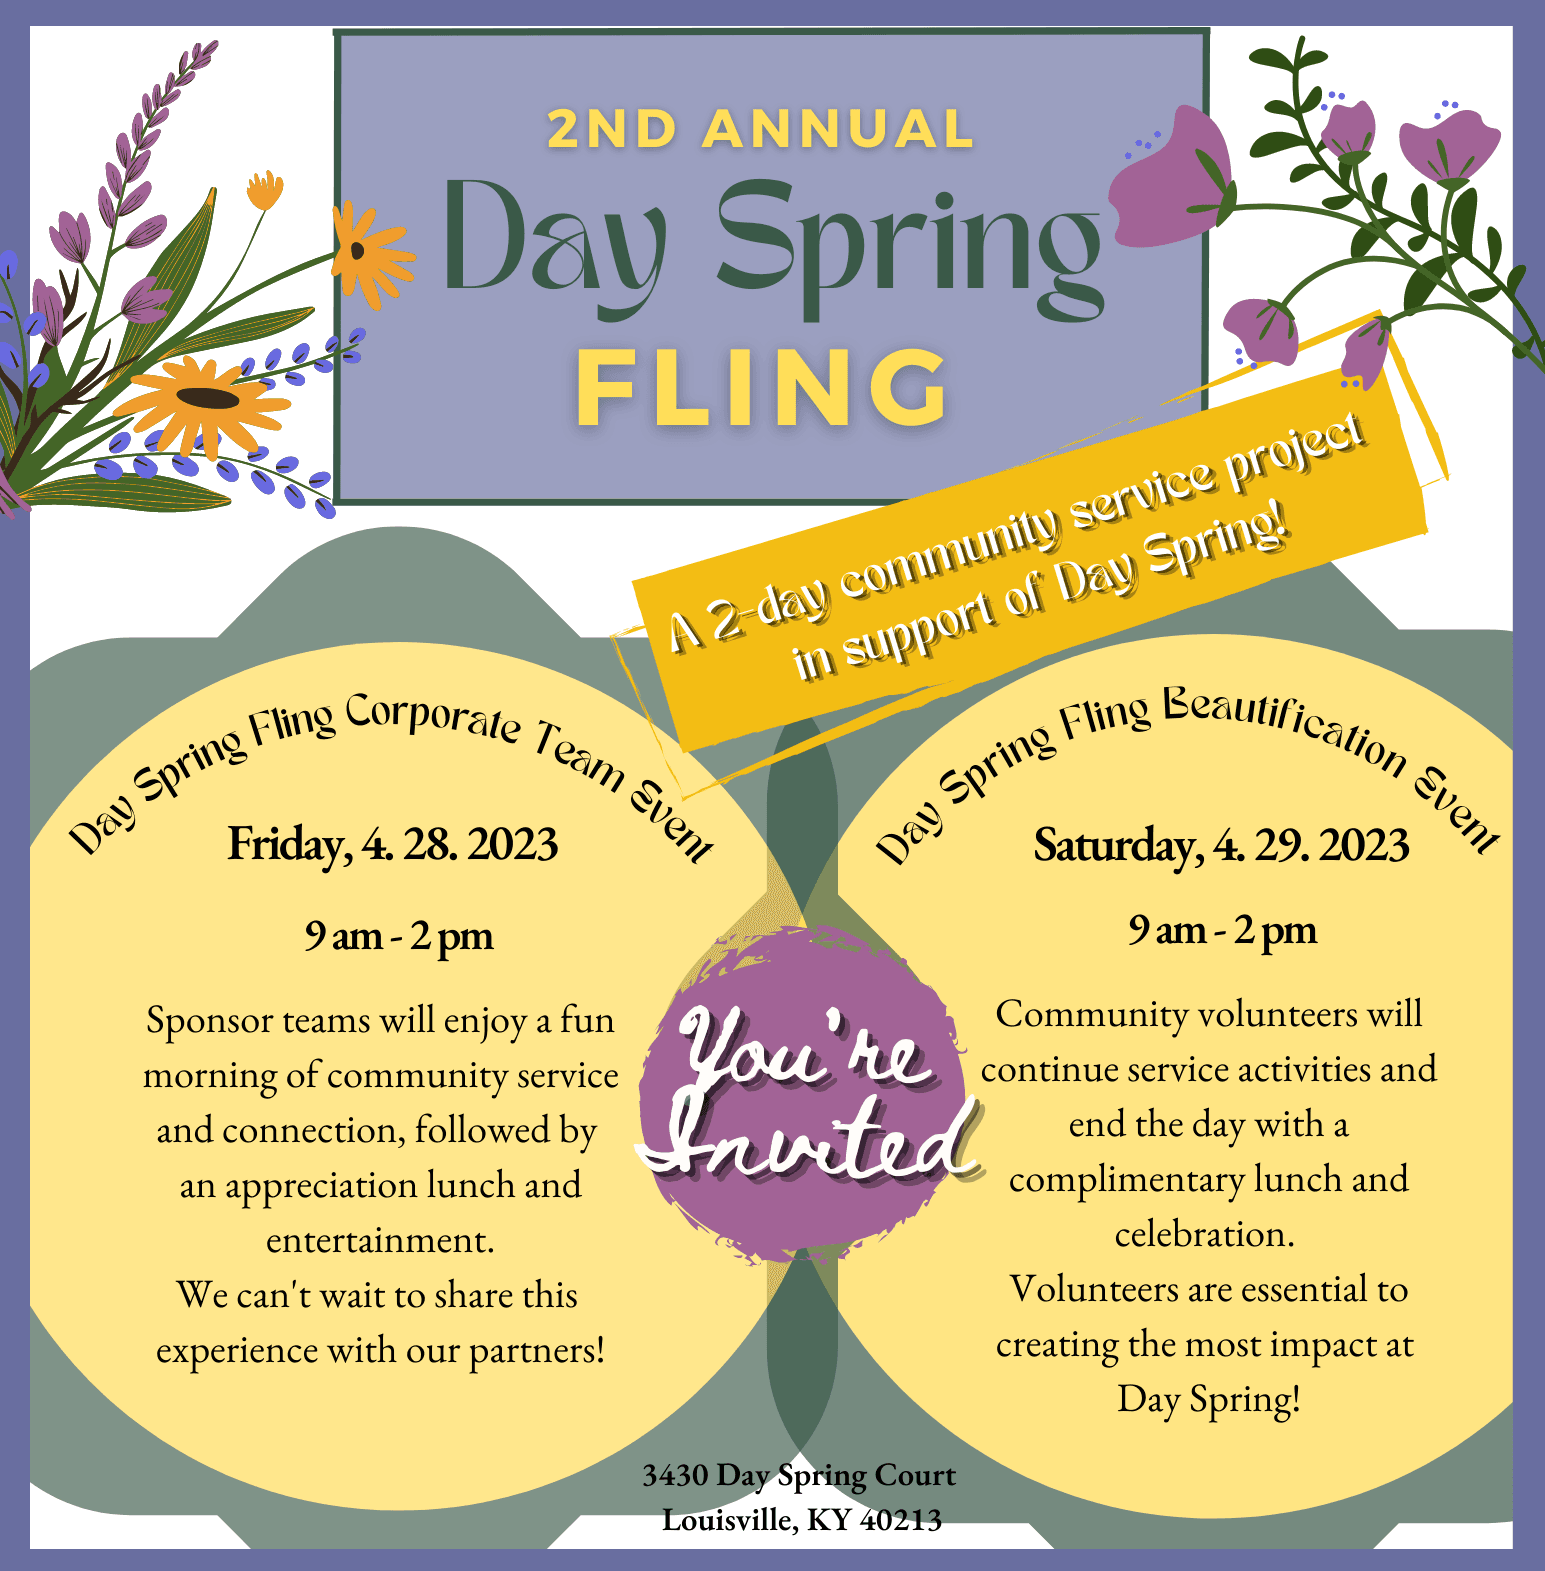 2nd Annual Day Spring Fling Events News & Events Day Spring